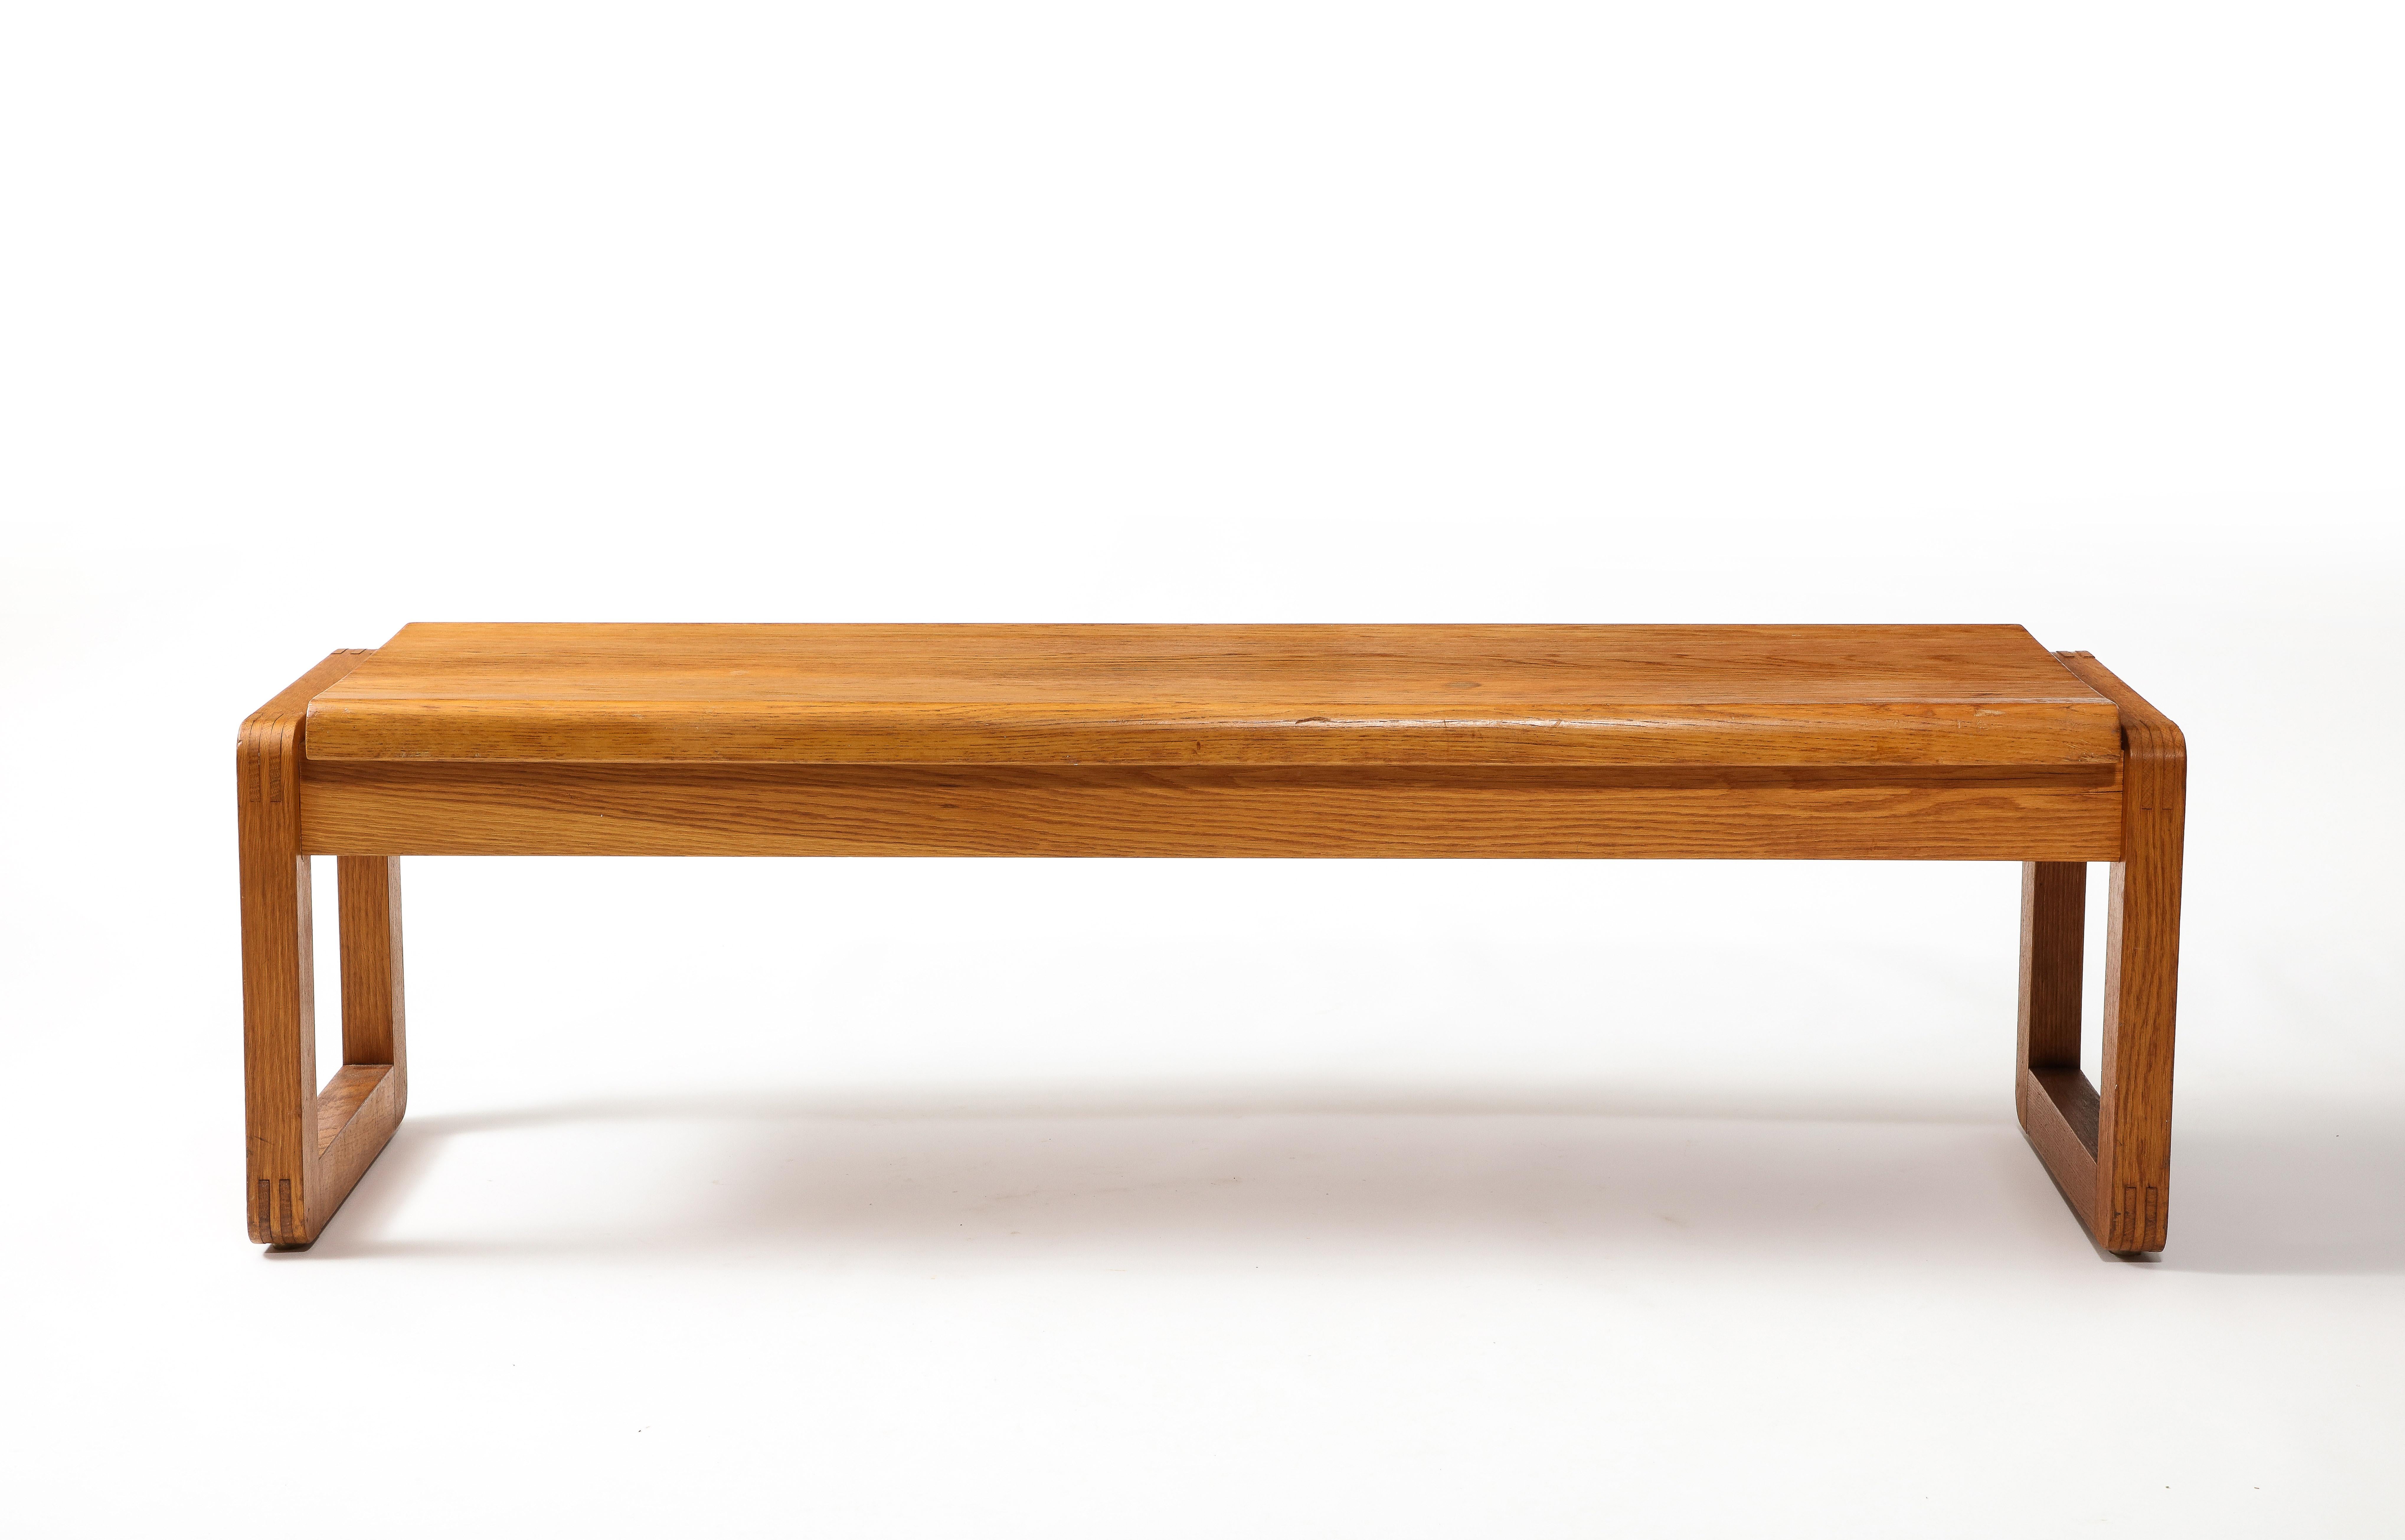 Dutch Minimalist Solid Oak Bench in style of Guillerme & Chambron  - Netherlands 1970s For Sale